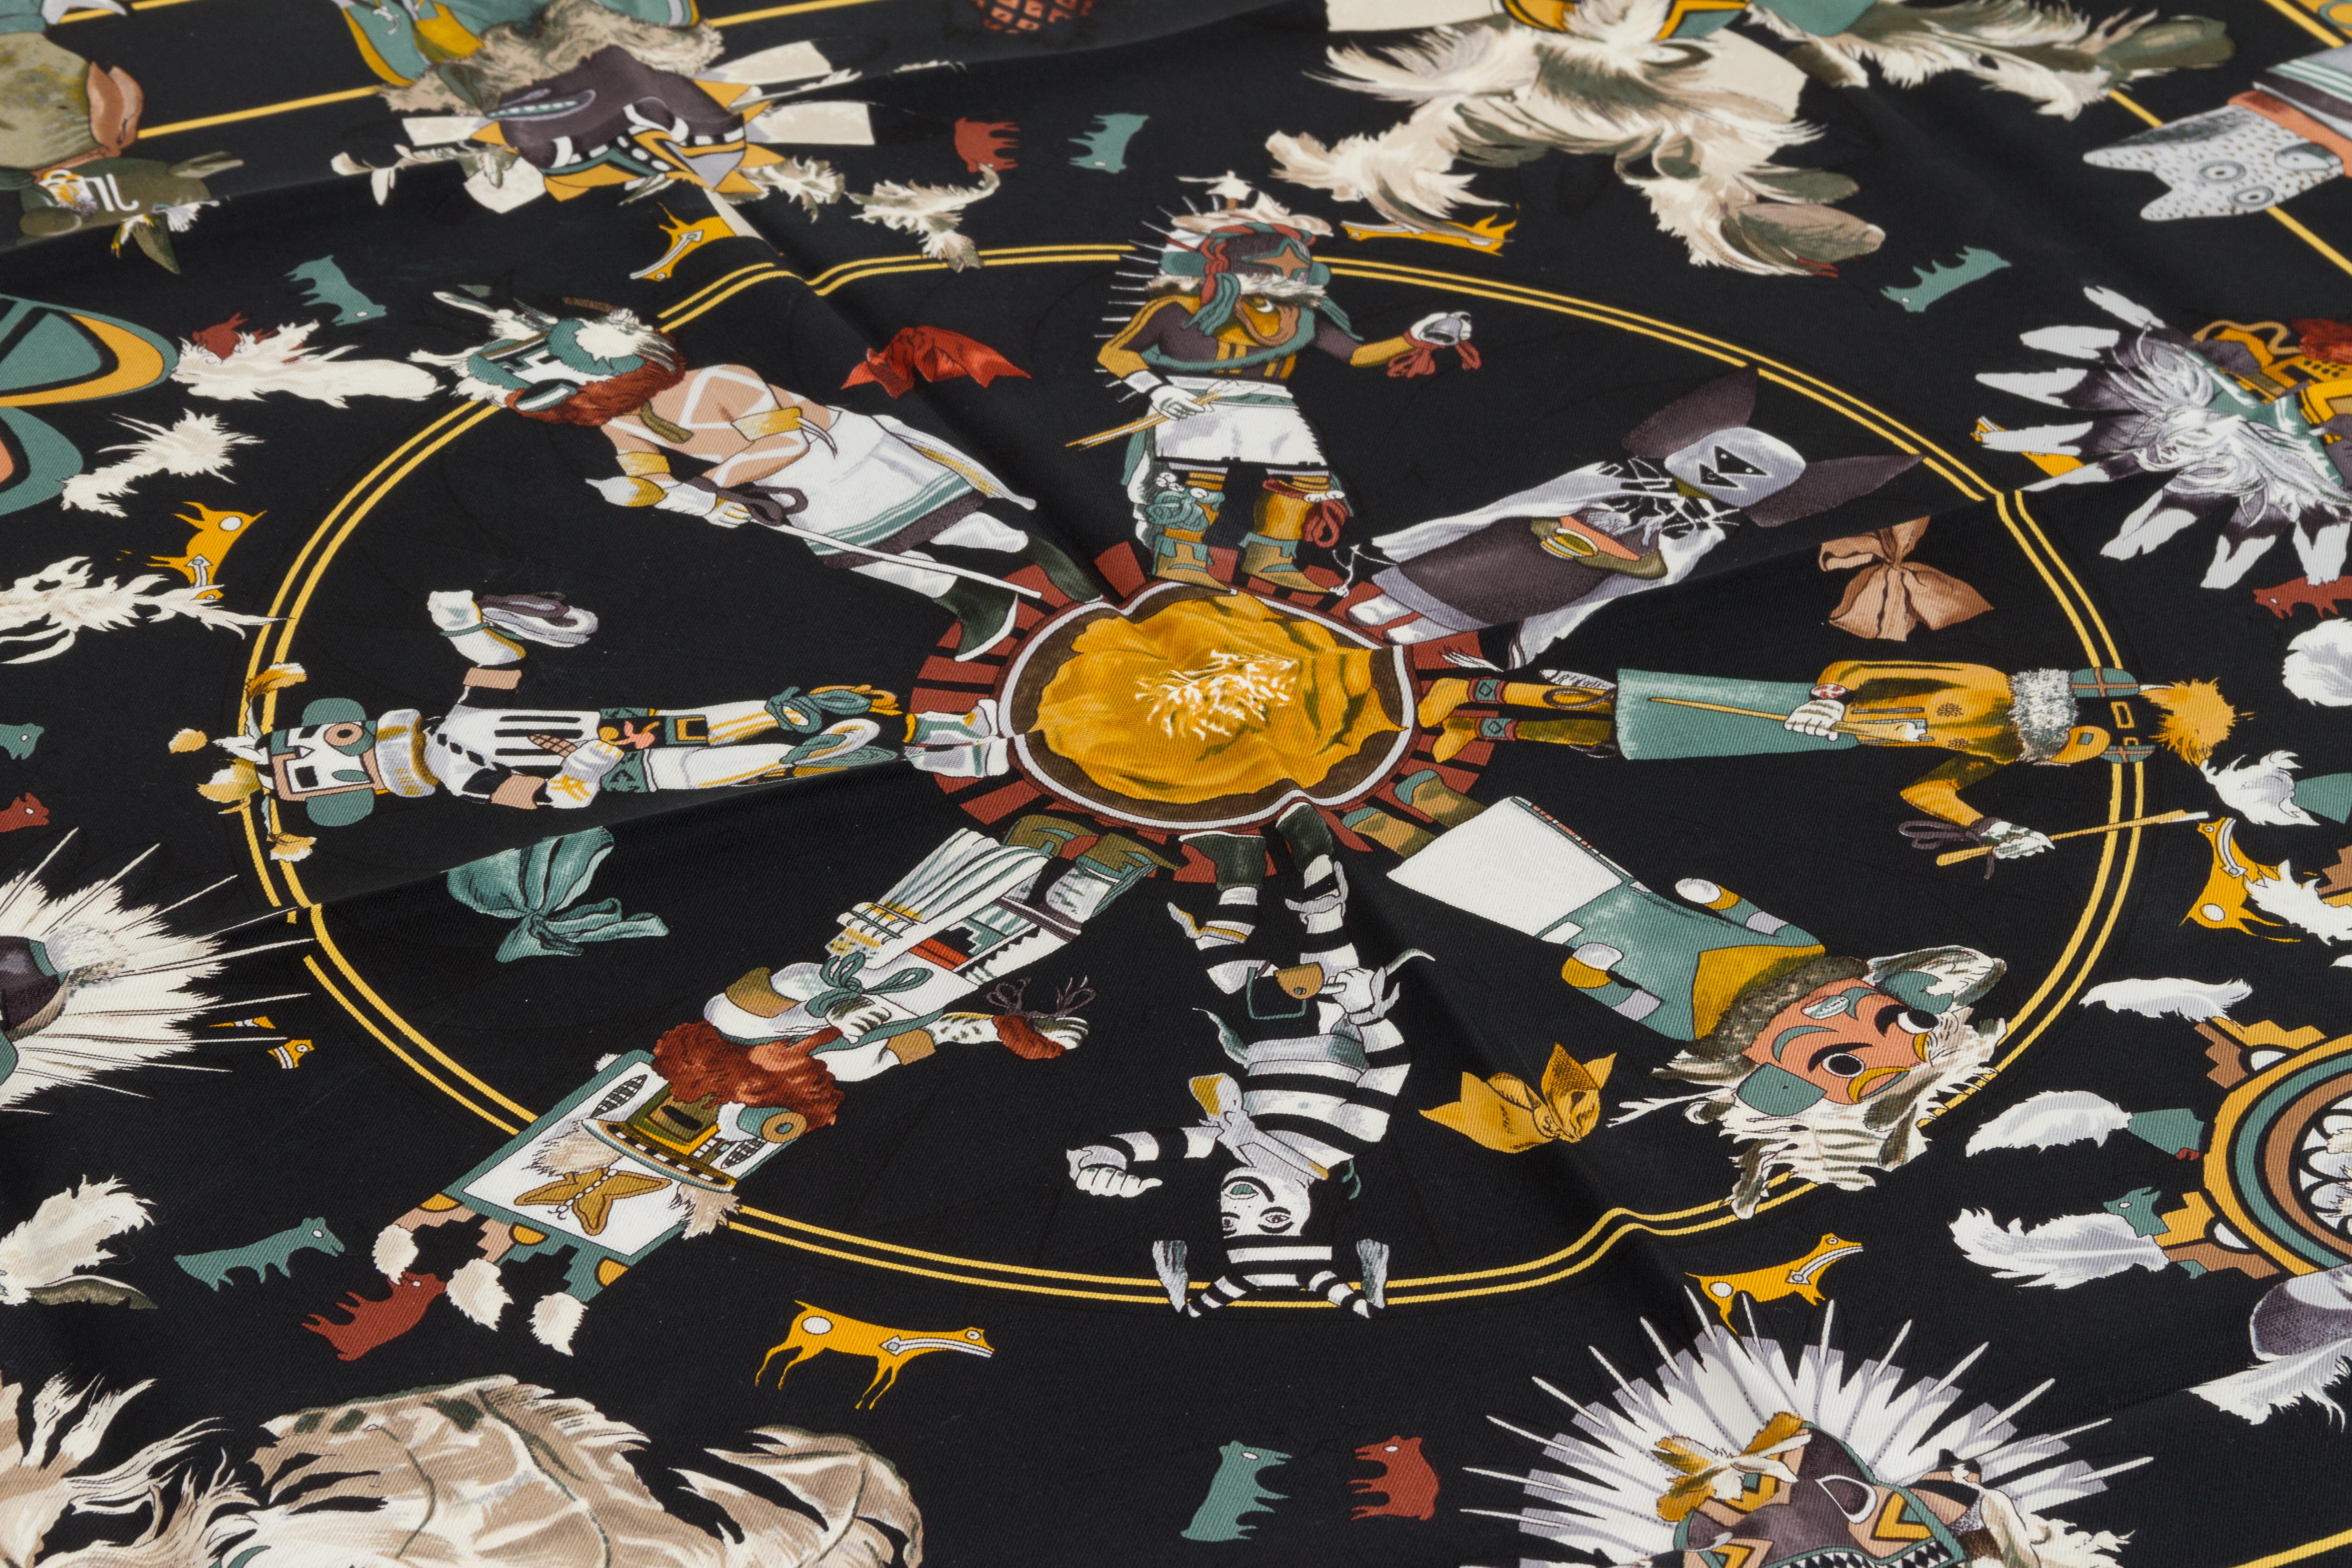 Hermès black and brown silk twill Kachinas scarf designed by Kermit Oliver. Hand-rolled edges.